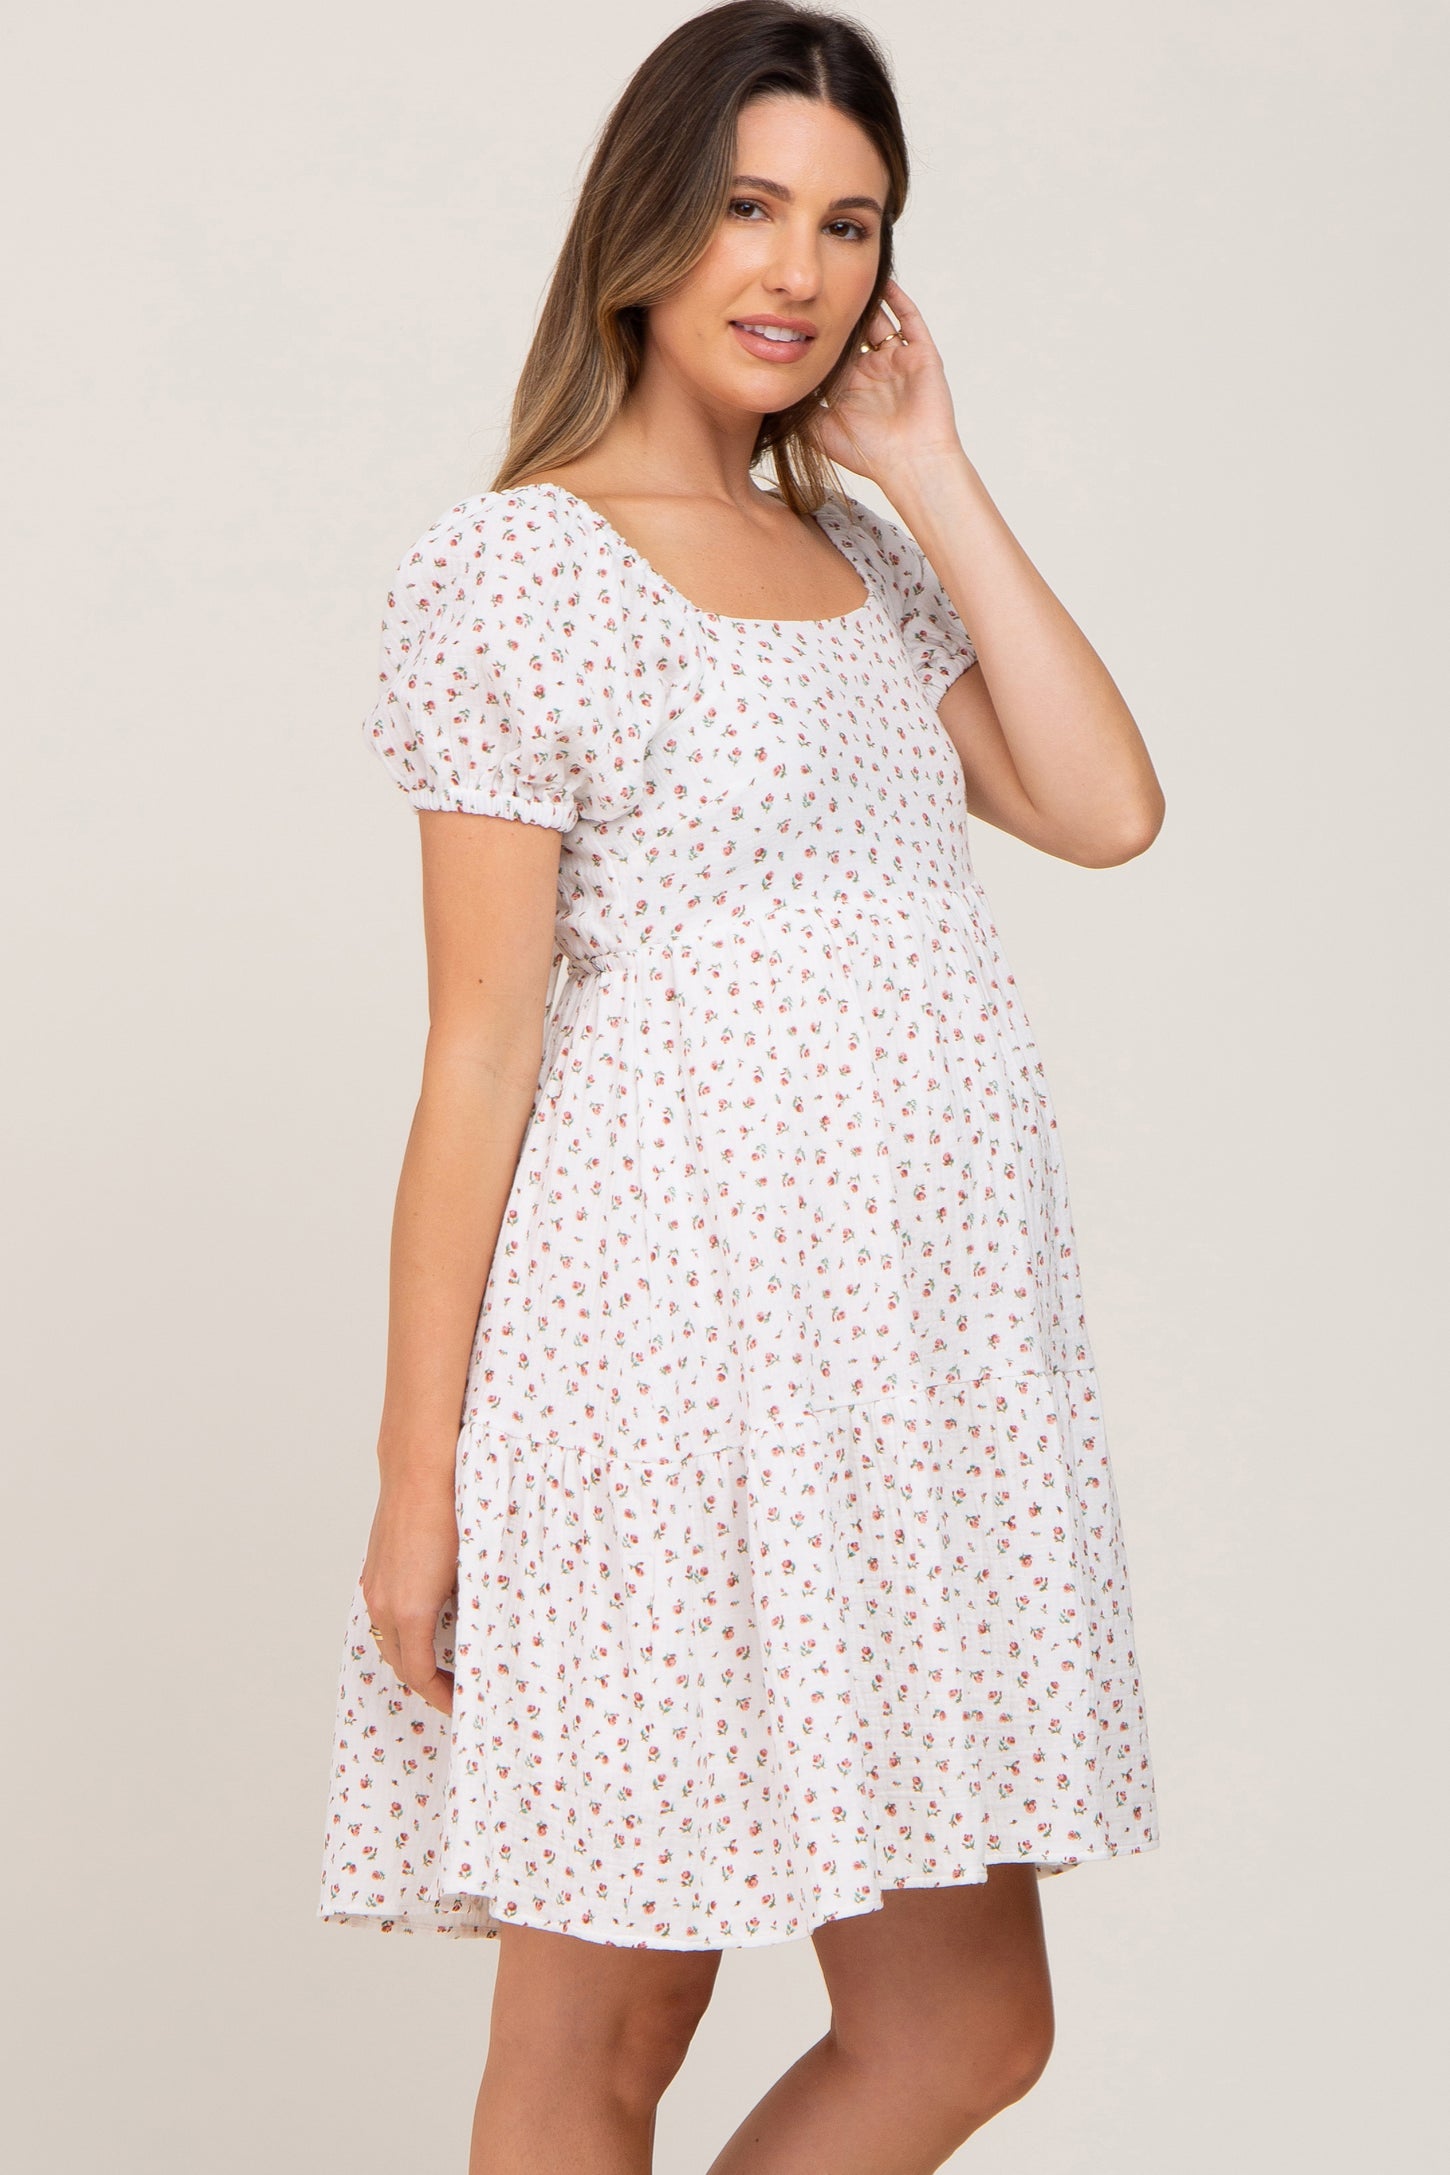 Ivory Floral Puff Sleeve Maternity Dress